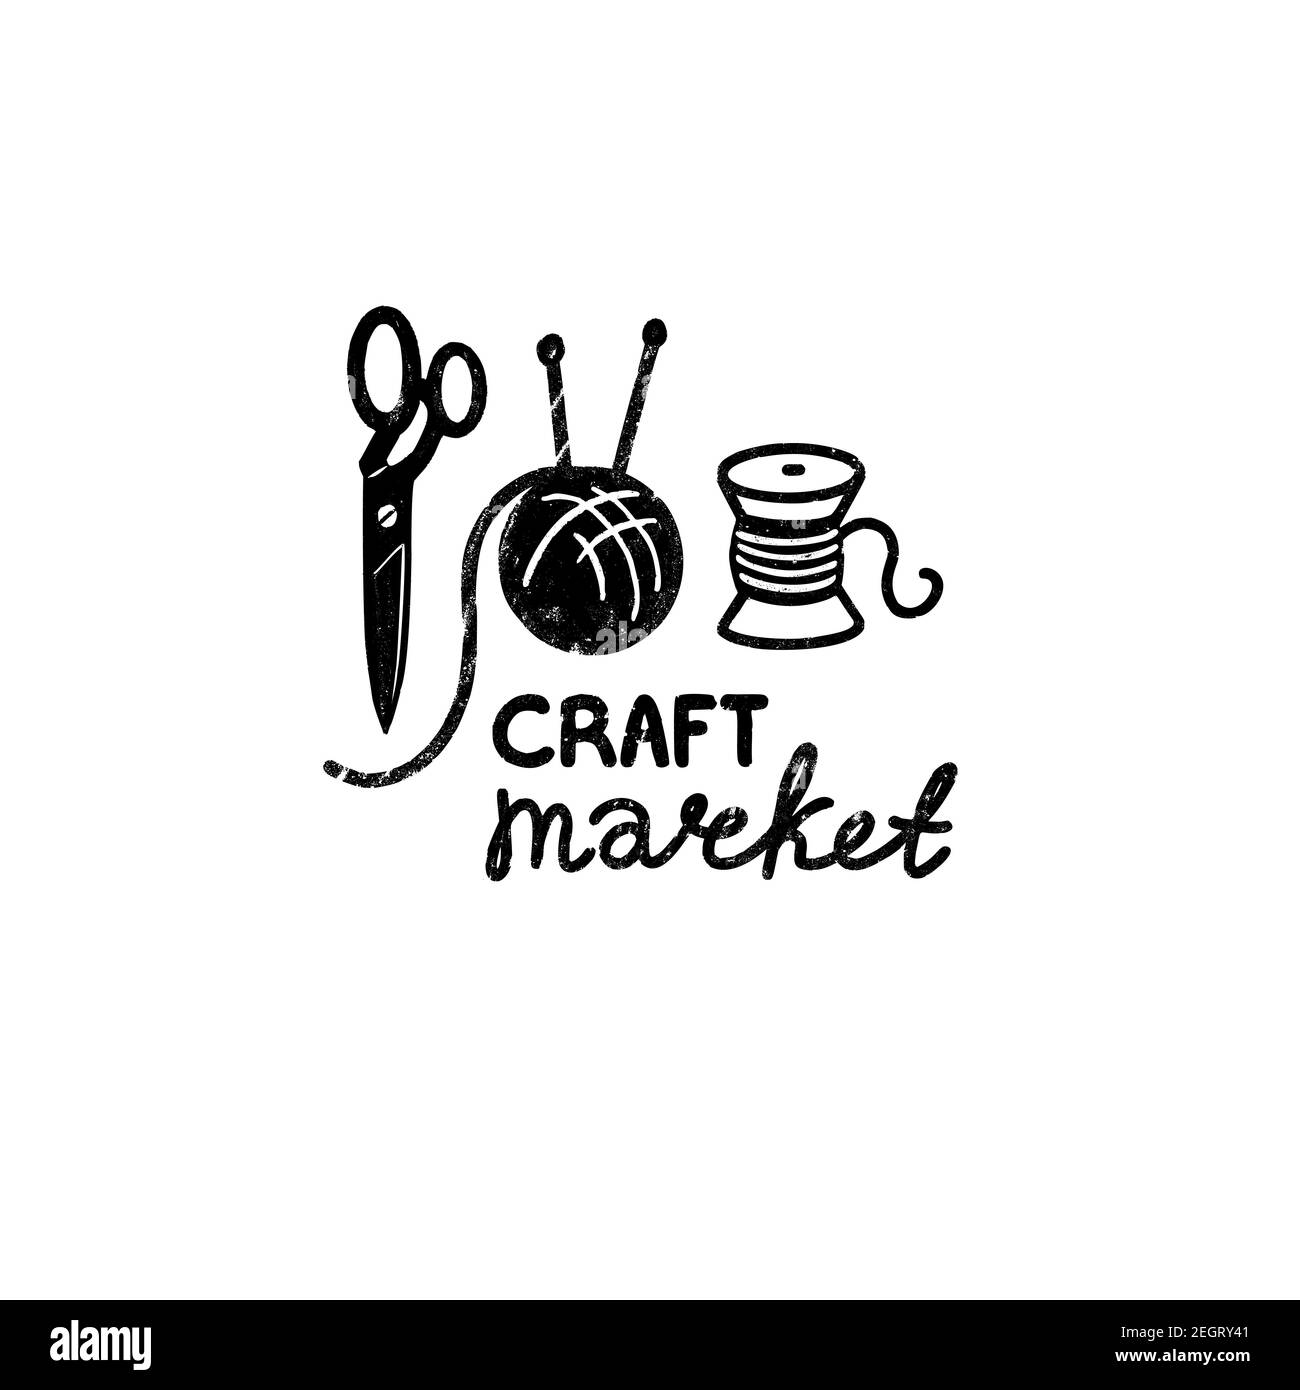 Craft market vector logo - a vintage scissors, ball of wool, and spool of thread in stamp style with craft market hand lettering. Vintage vector Stock Vector